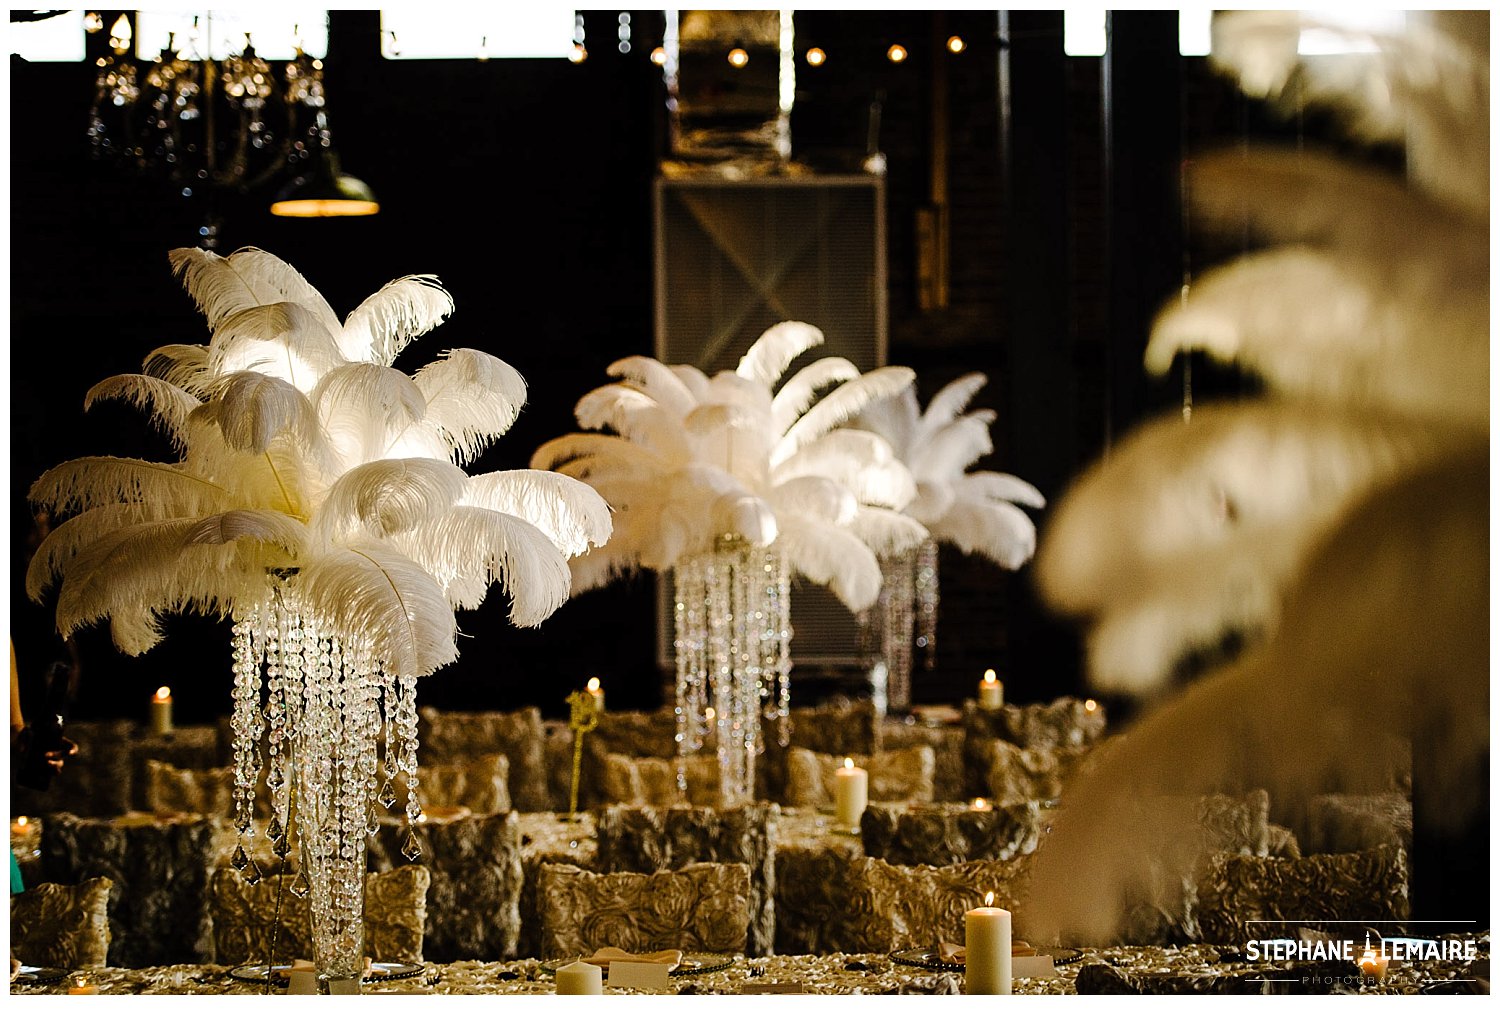 Epic Railyard wedding reception details by Stephane Lemaire photography